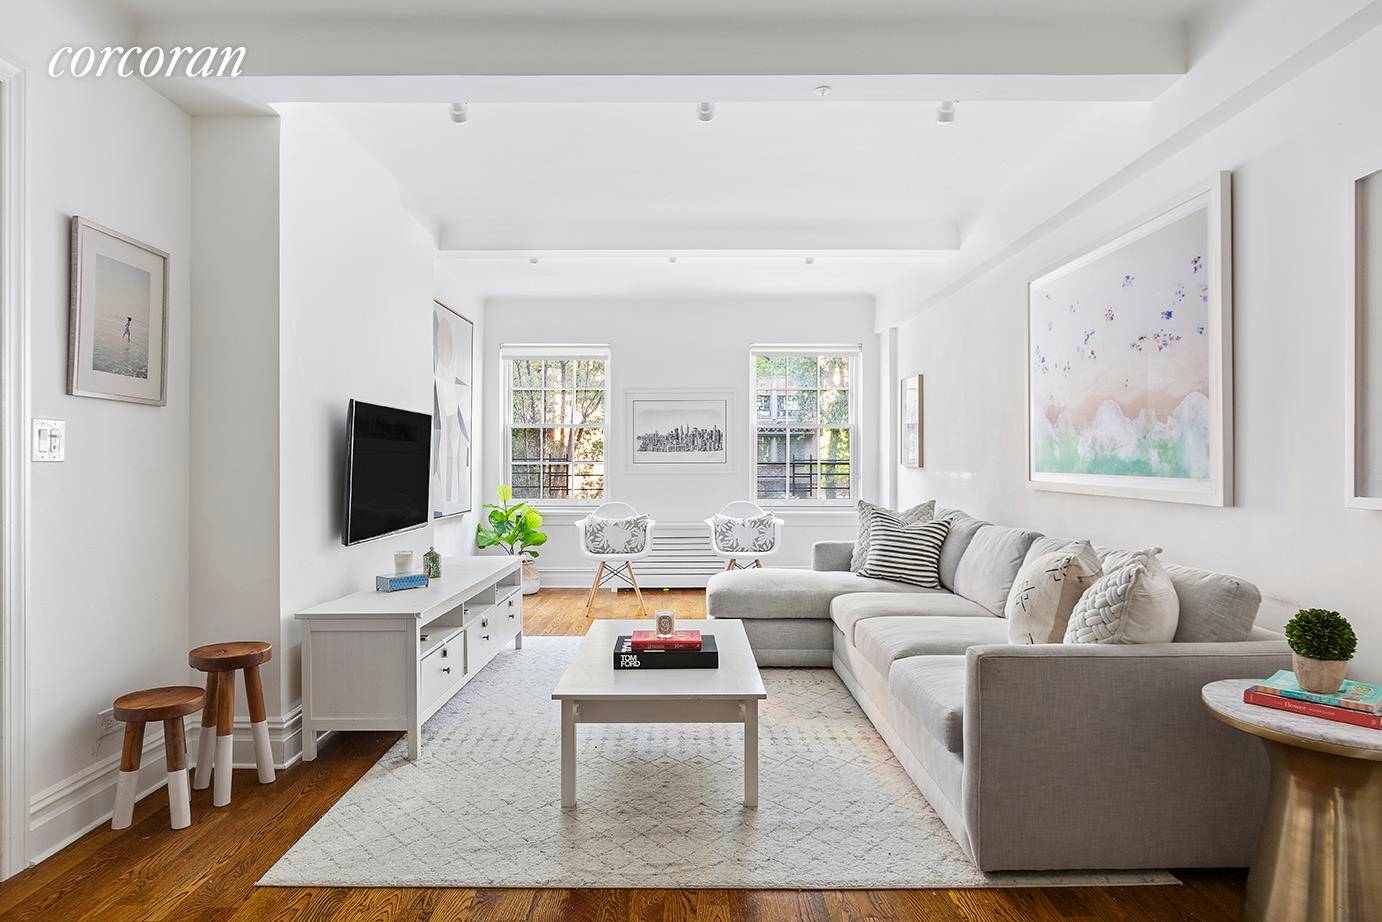 New to market is this impeccably renovated 2 bedroom flexible 3 bedroom coop, offering understated elegance with timeless pre war details in the heart of Greenwich Village.